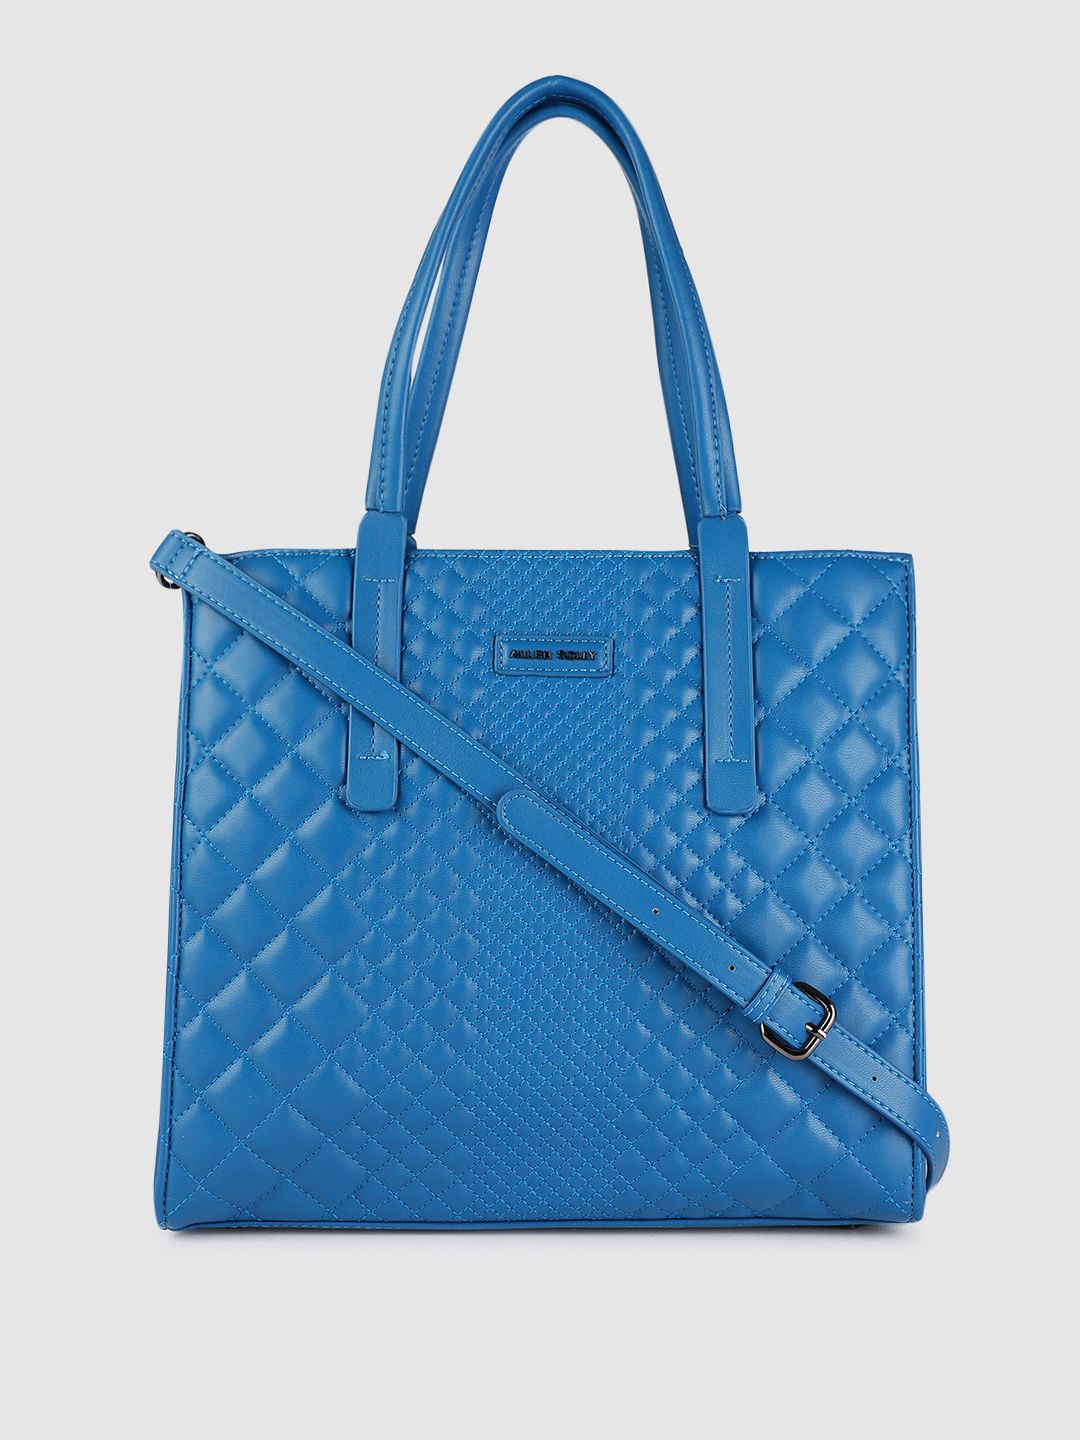 Allen Solly Blue Textured PU Structured Sling Bag with Quilted Price in India